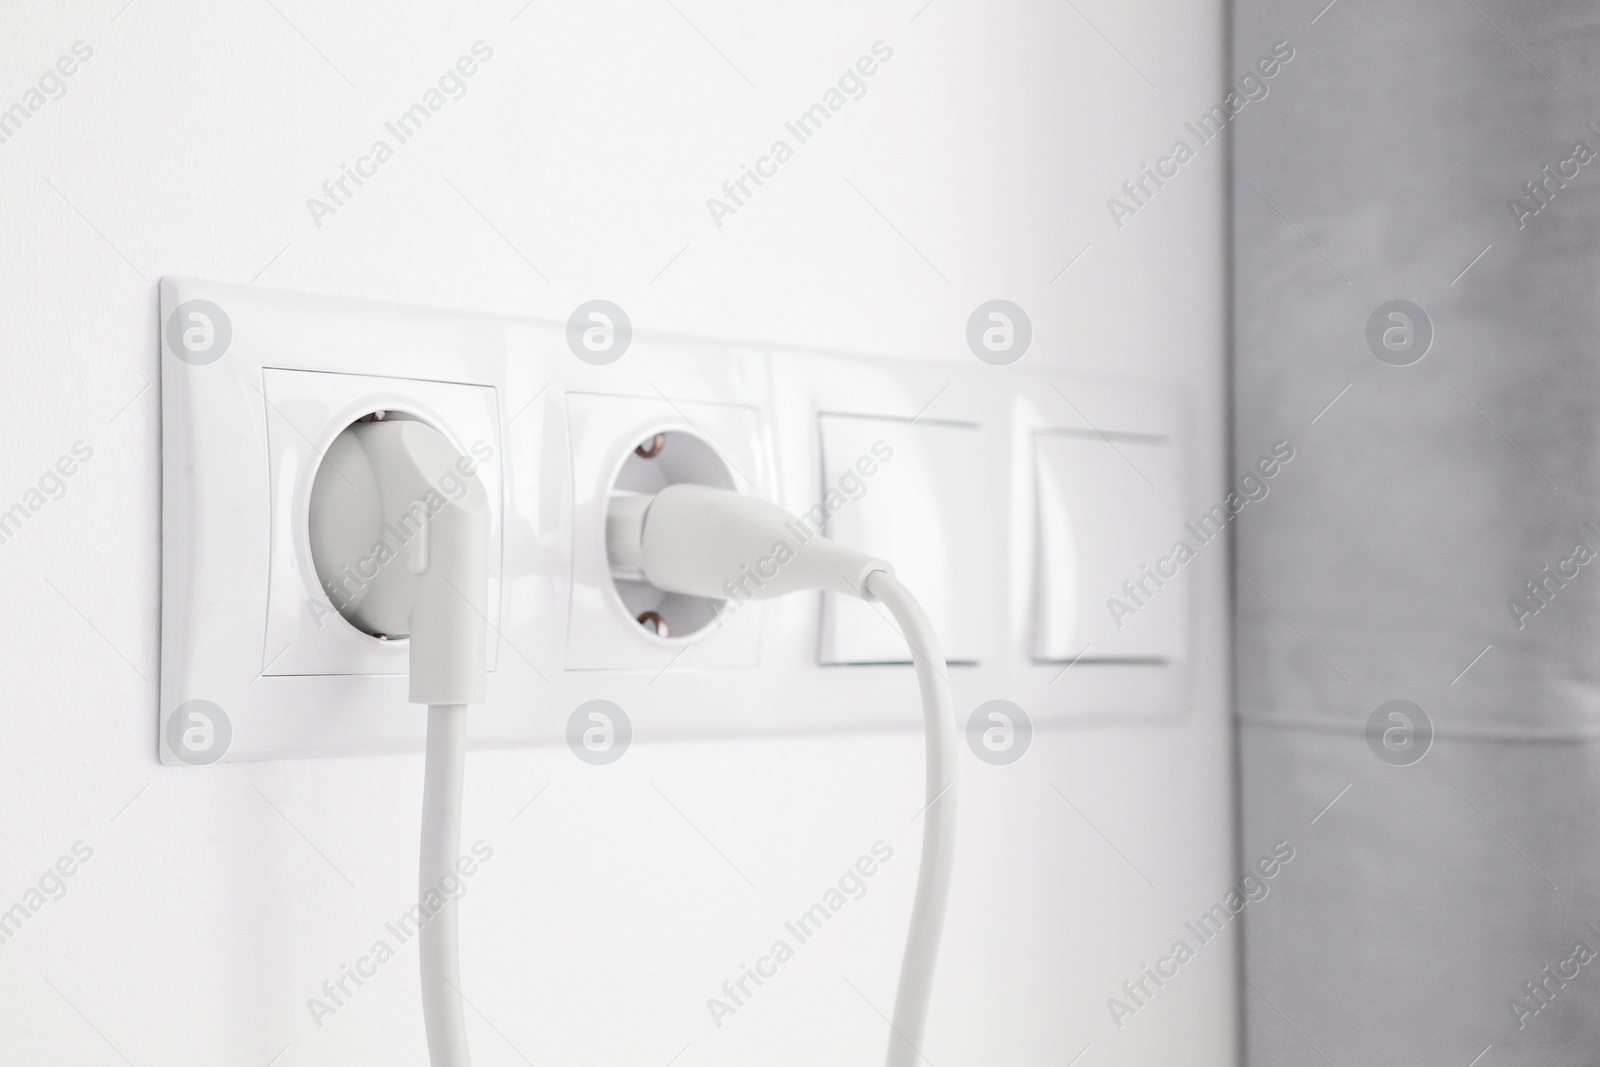 Photo of Power sockets with inserted plugs and light switches on white wall indoors